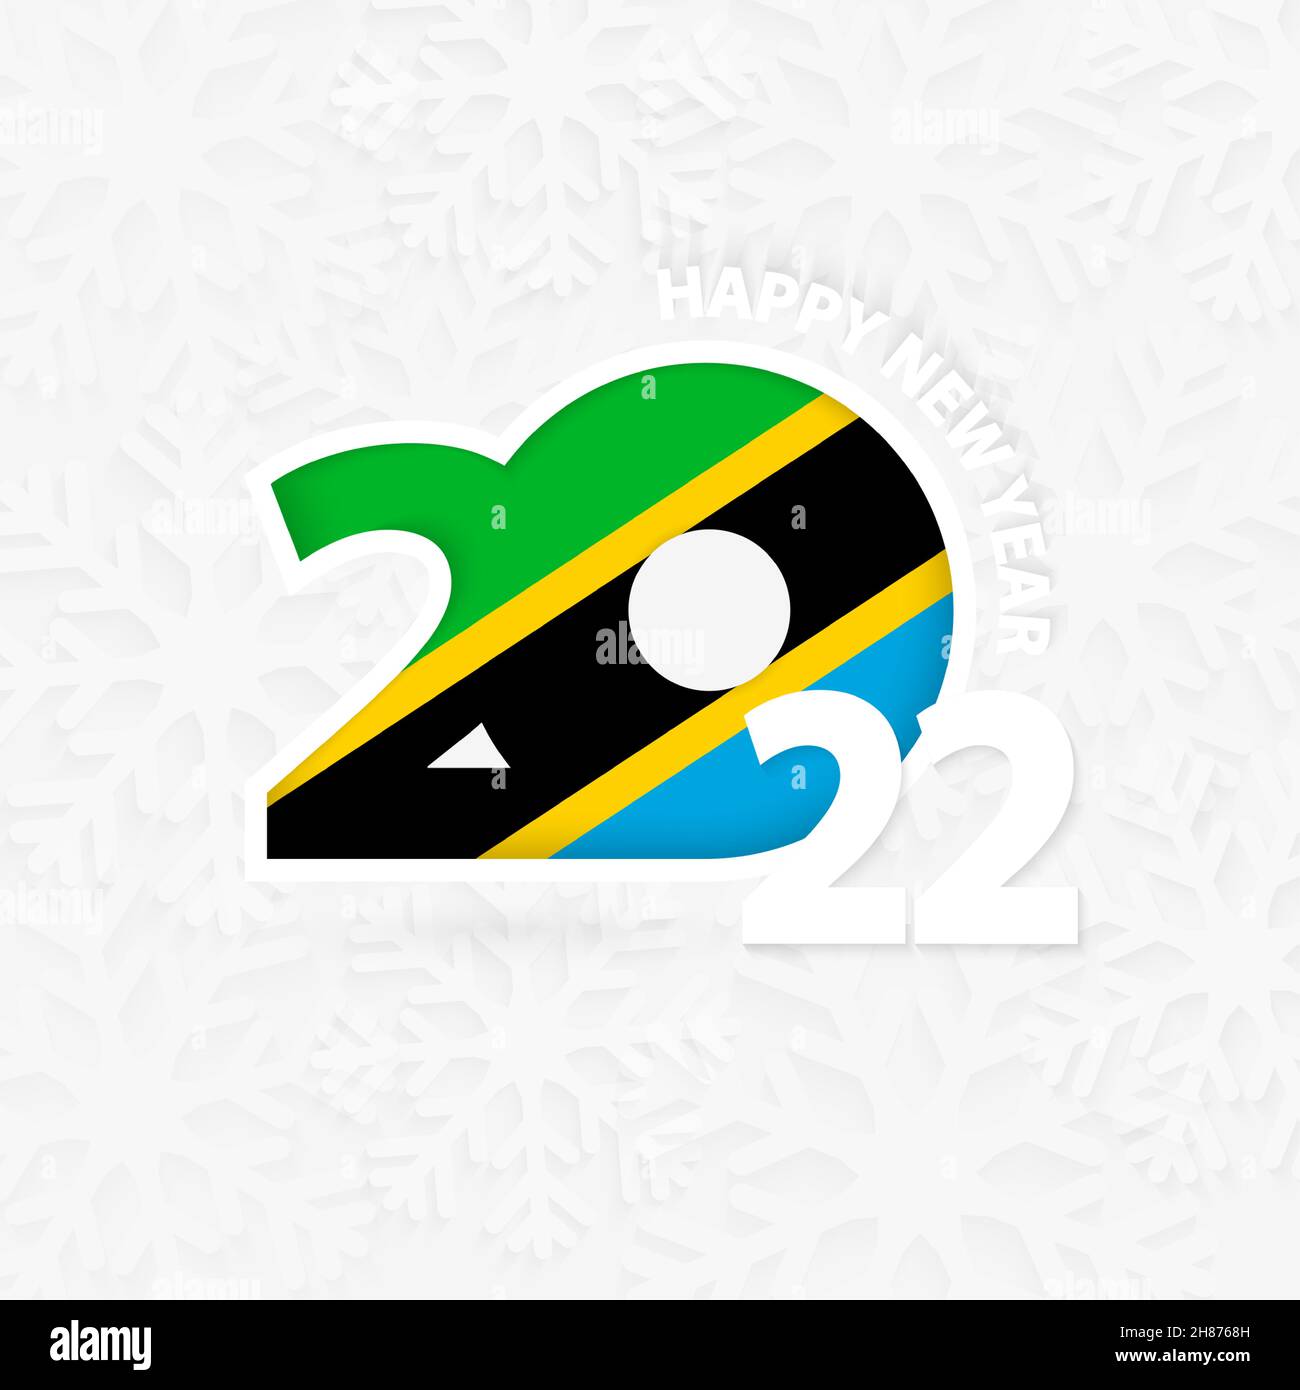 Happy New Year 2022 for Tanzania on snowflake background. Greeting Tanzania with new 2022 year. Stock Vector